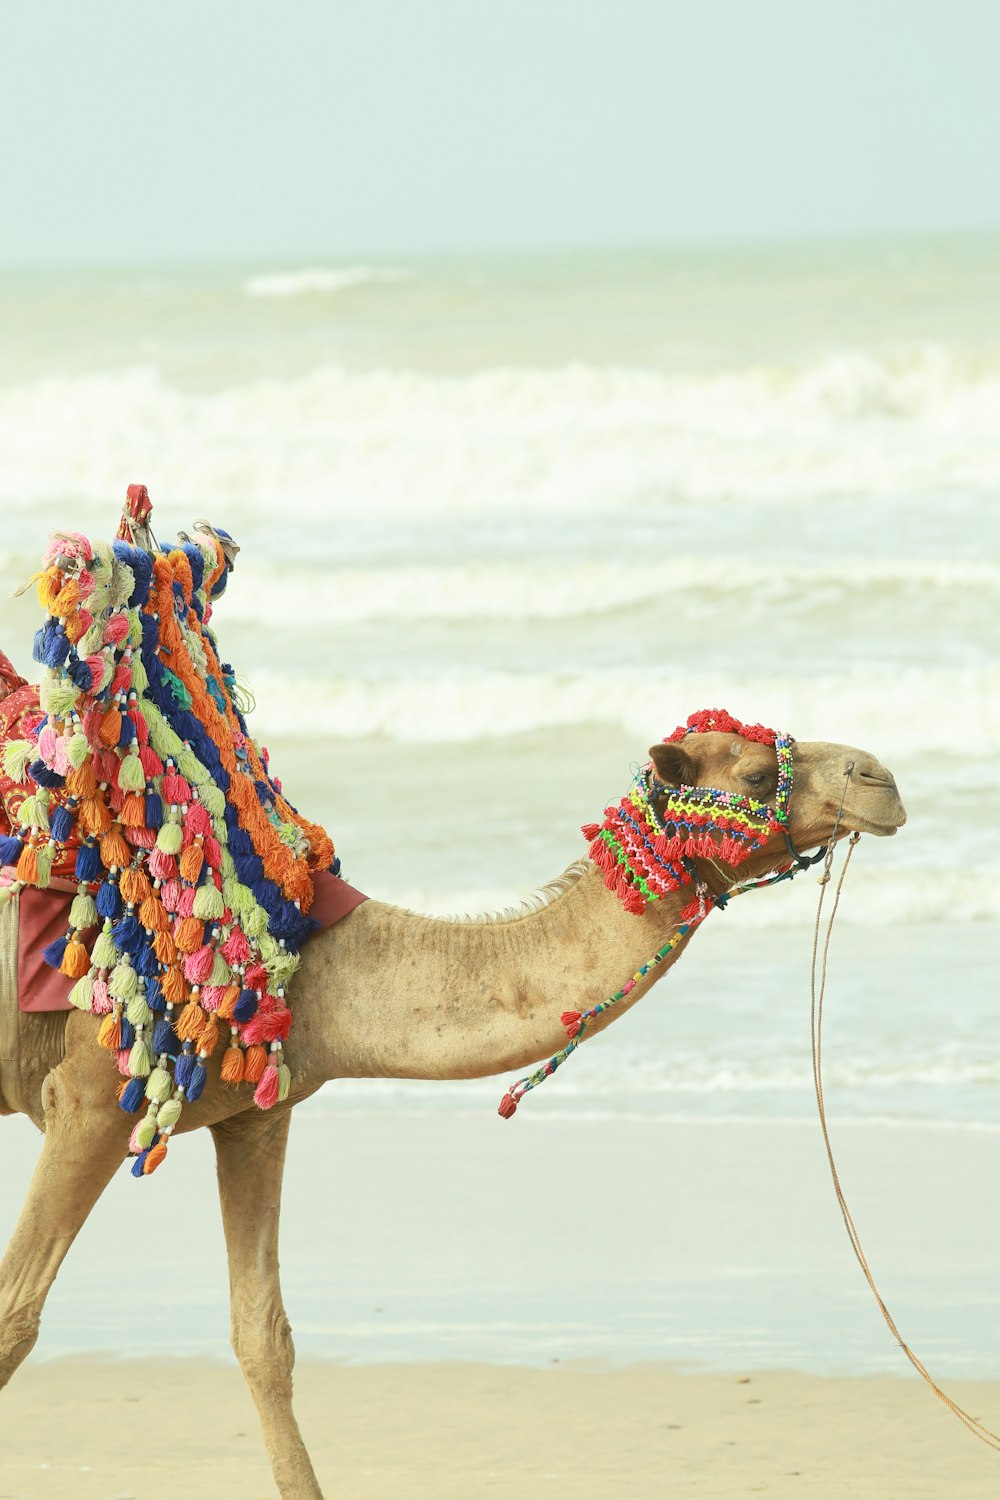 a camel with a colorful headdress walking on the beach